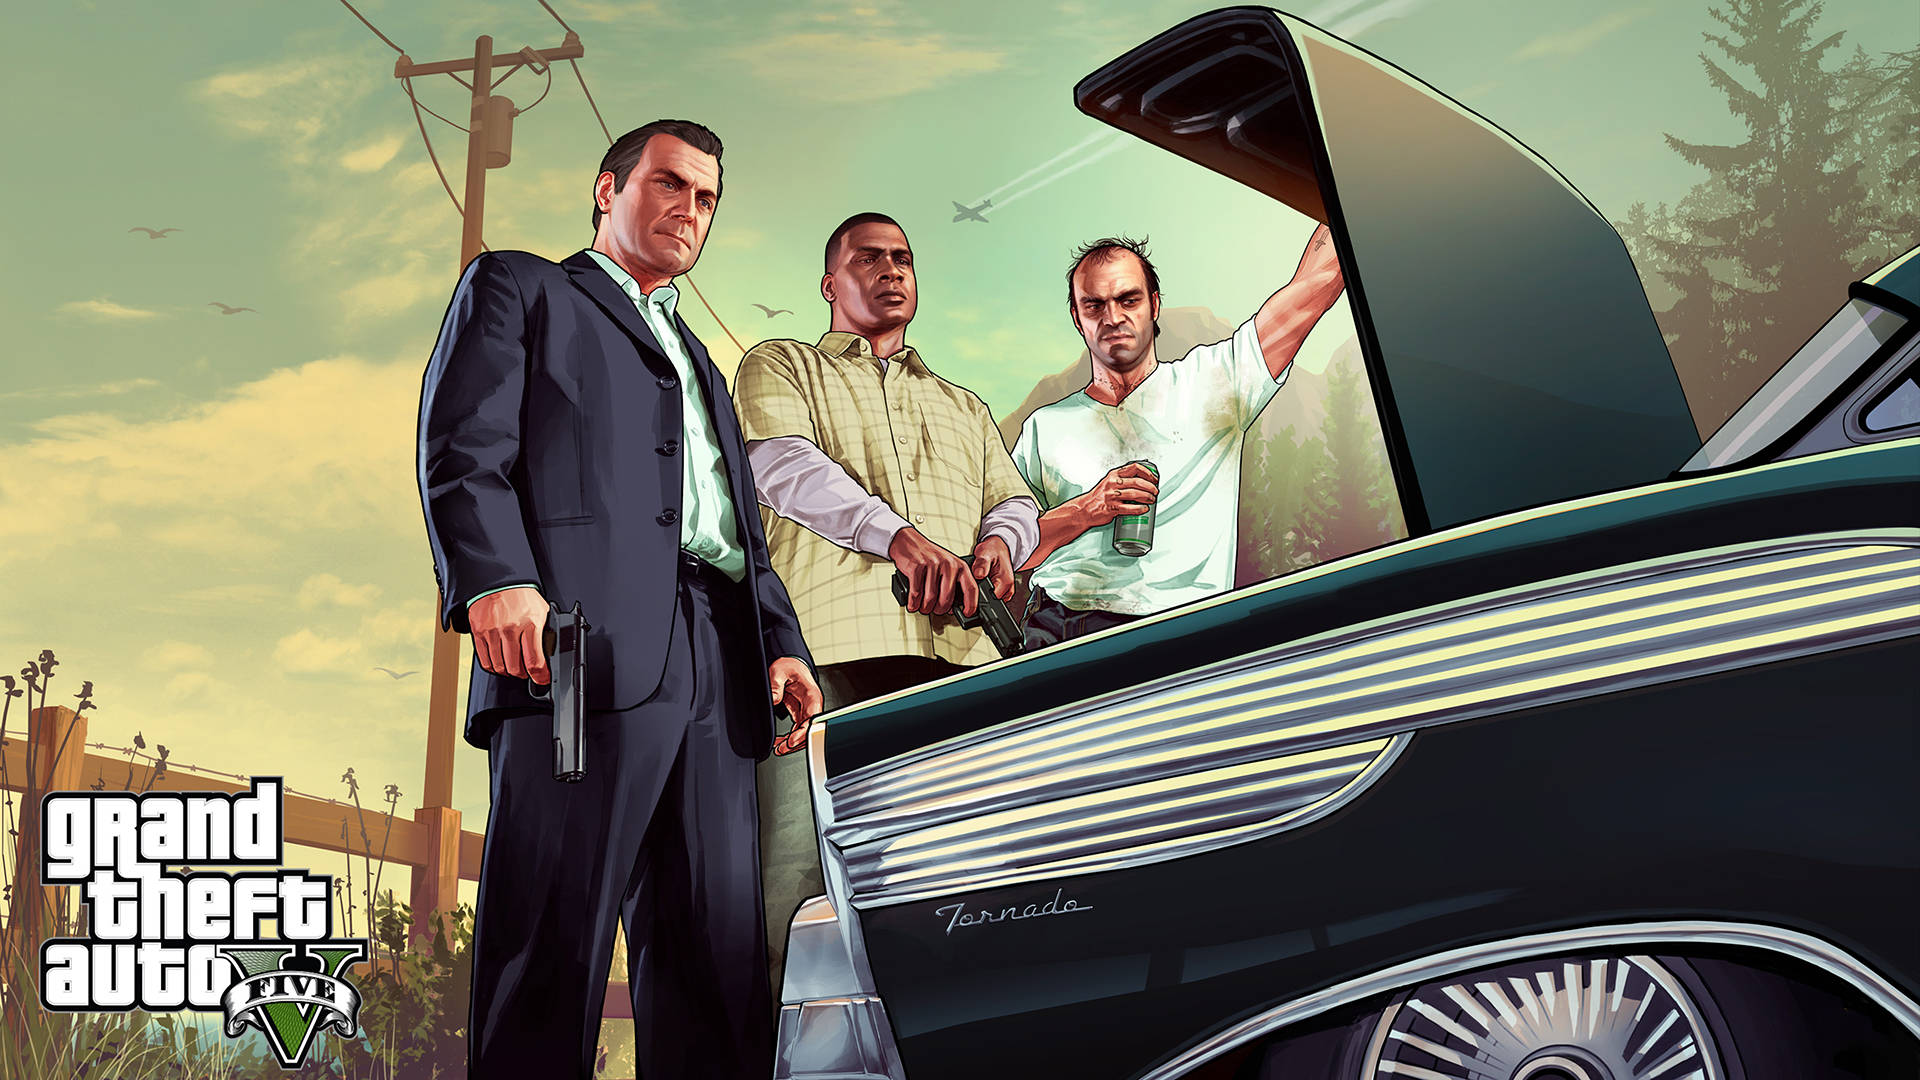 Get ready to explore a vibrant open world with Cool GTA 5 Wallpaper